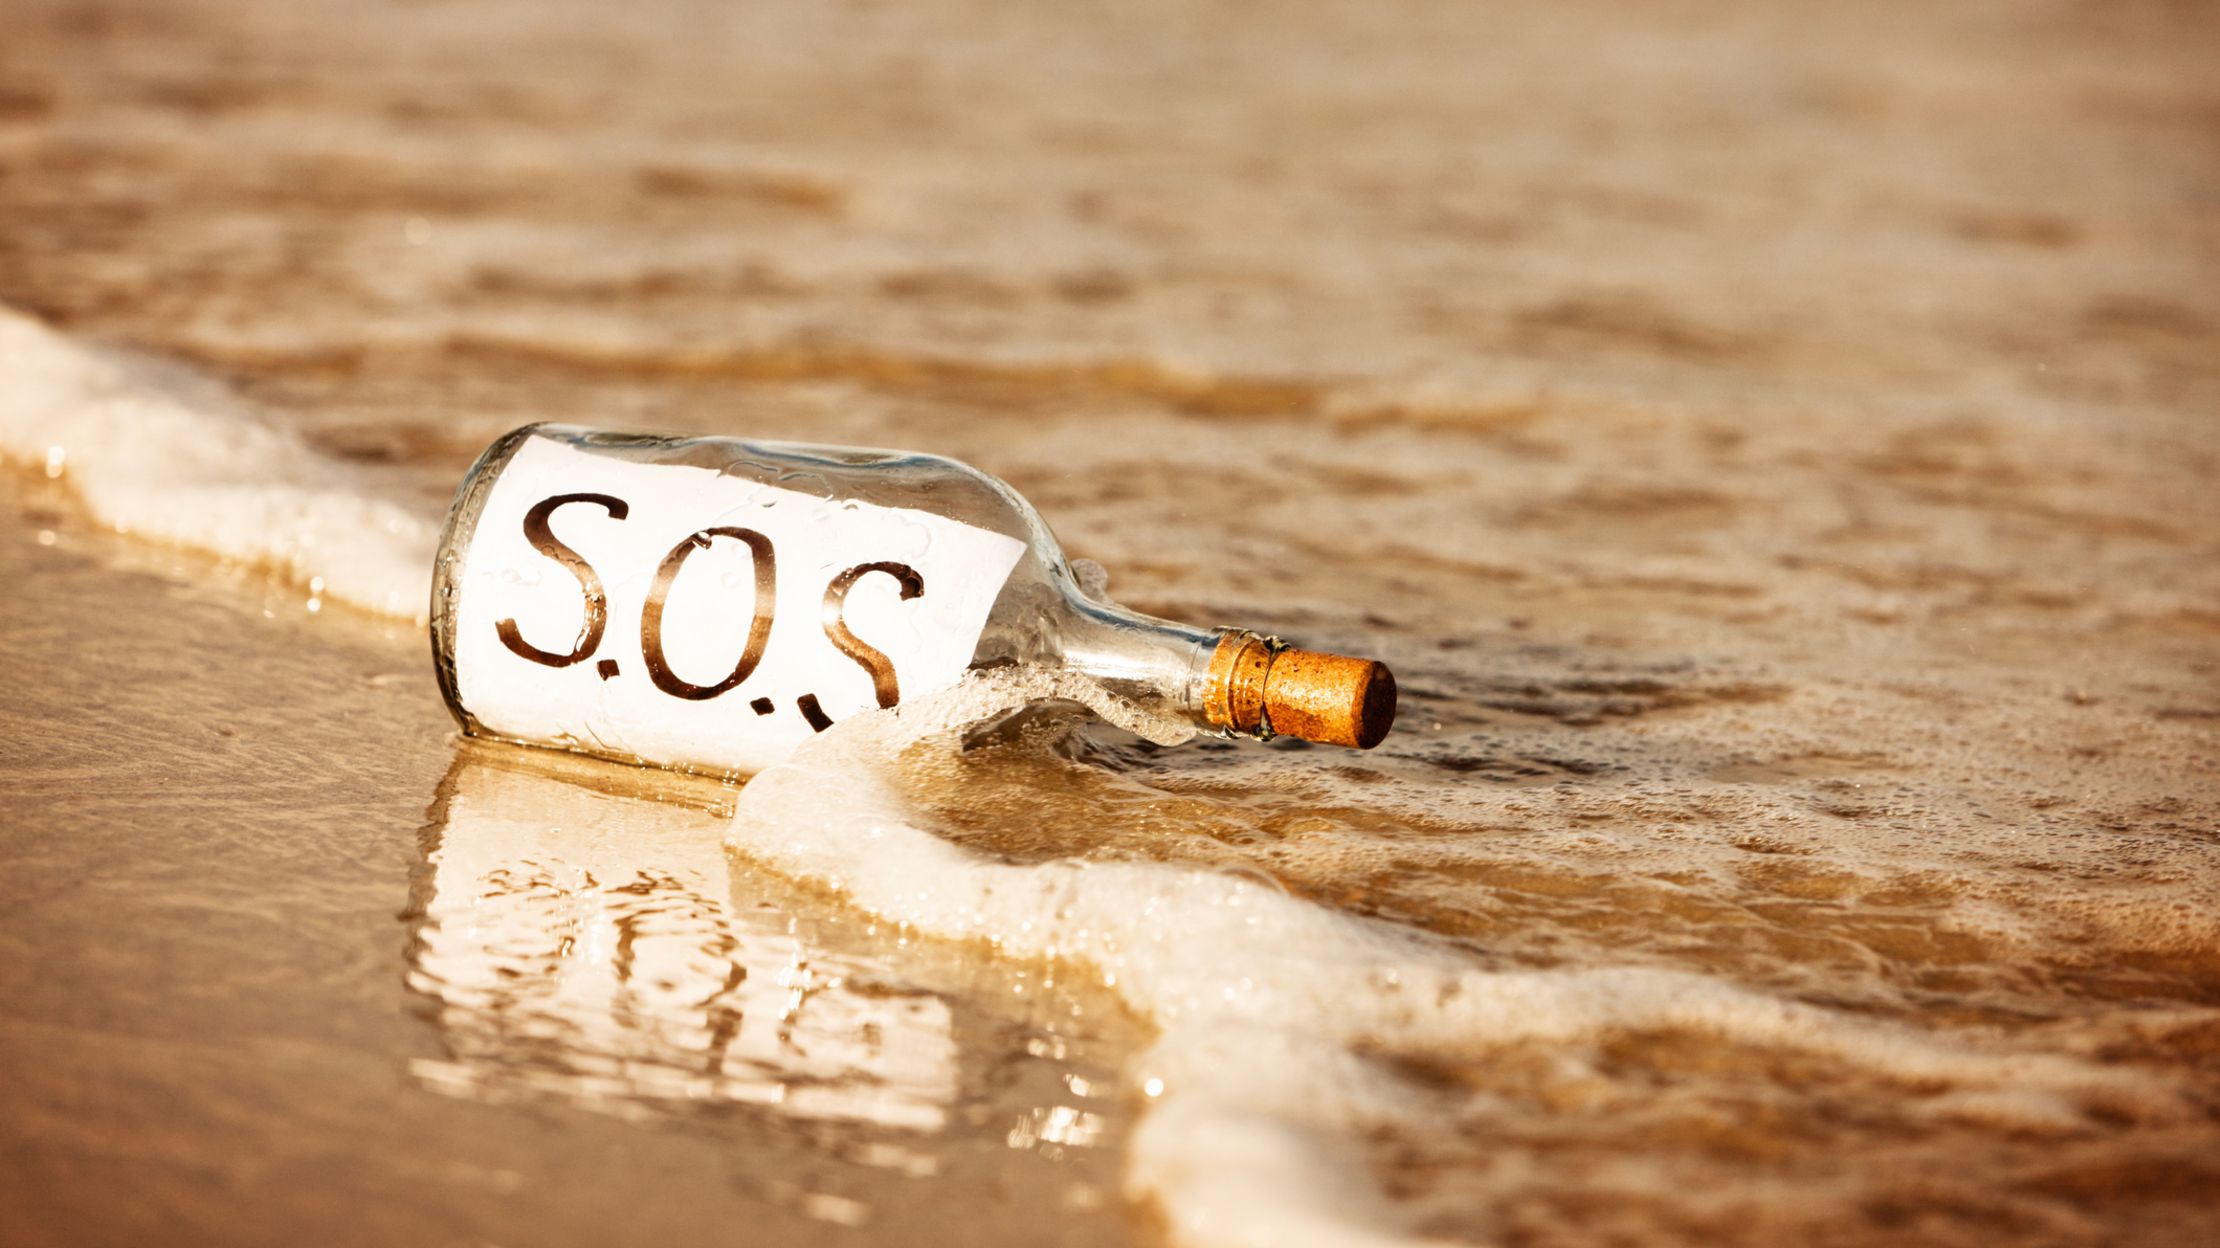 What Does SOS Stand For? | Mental Floss